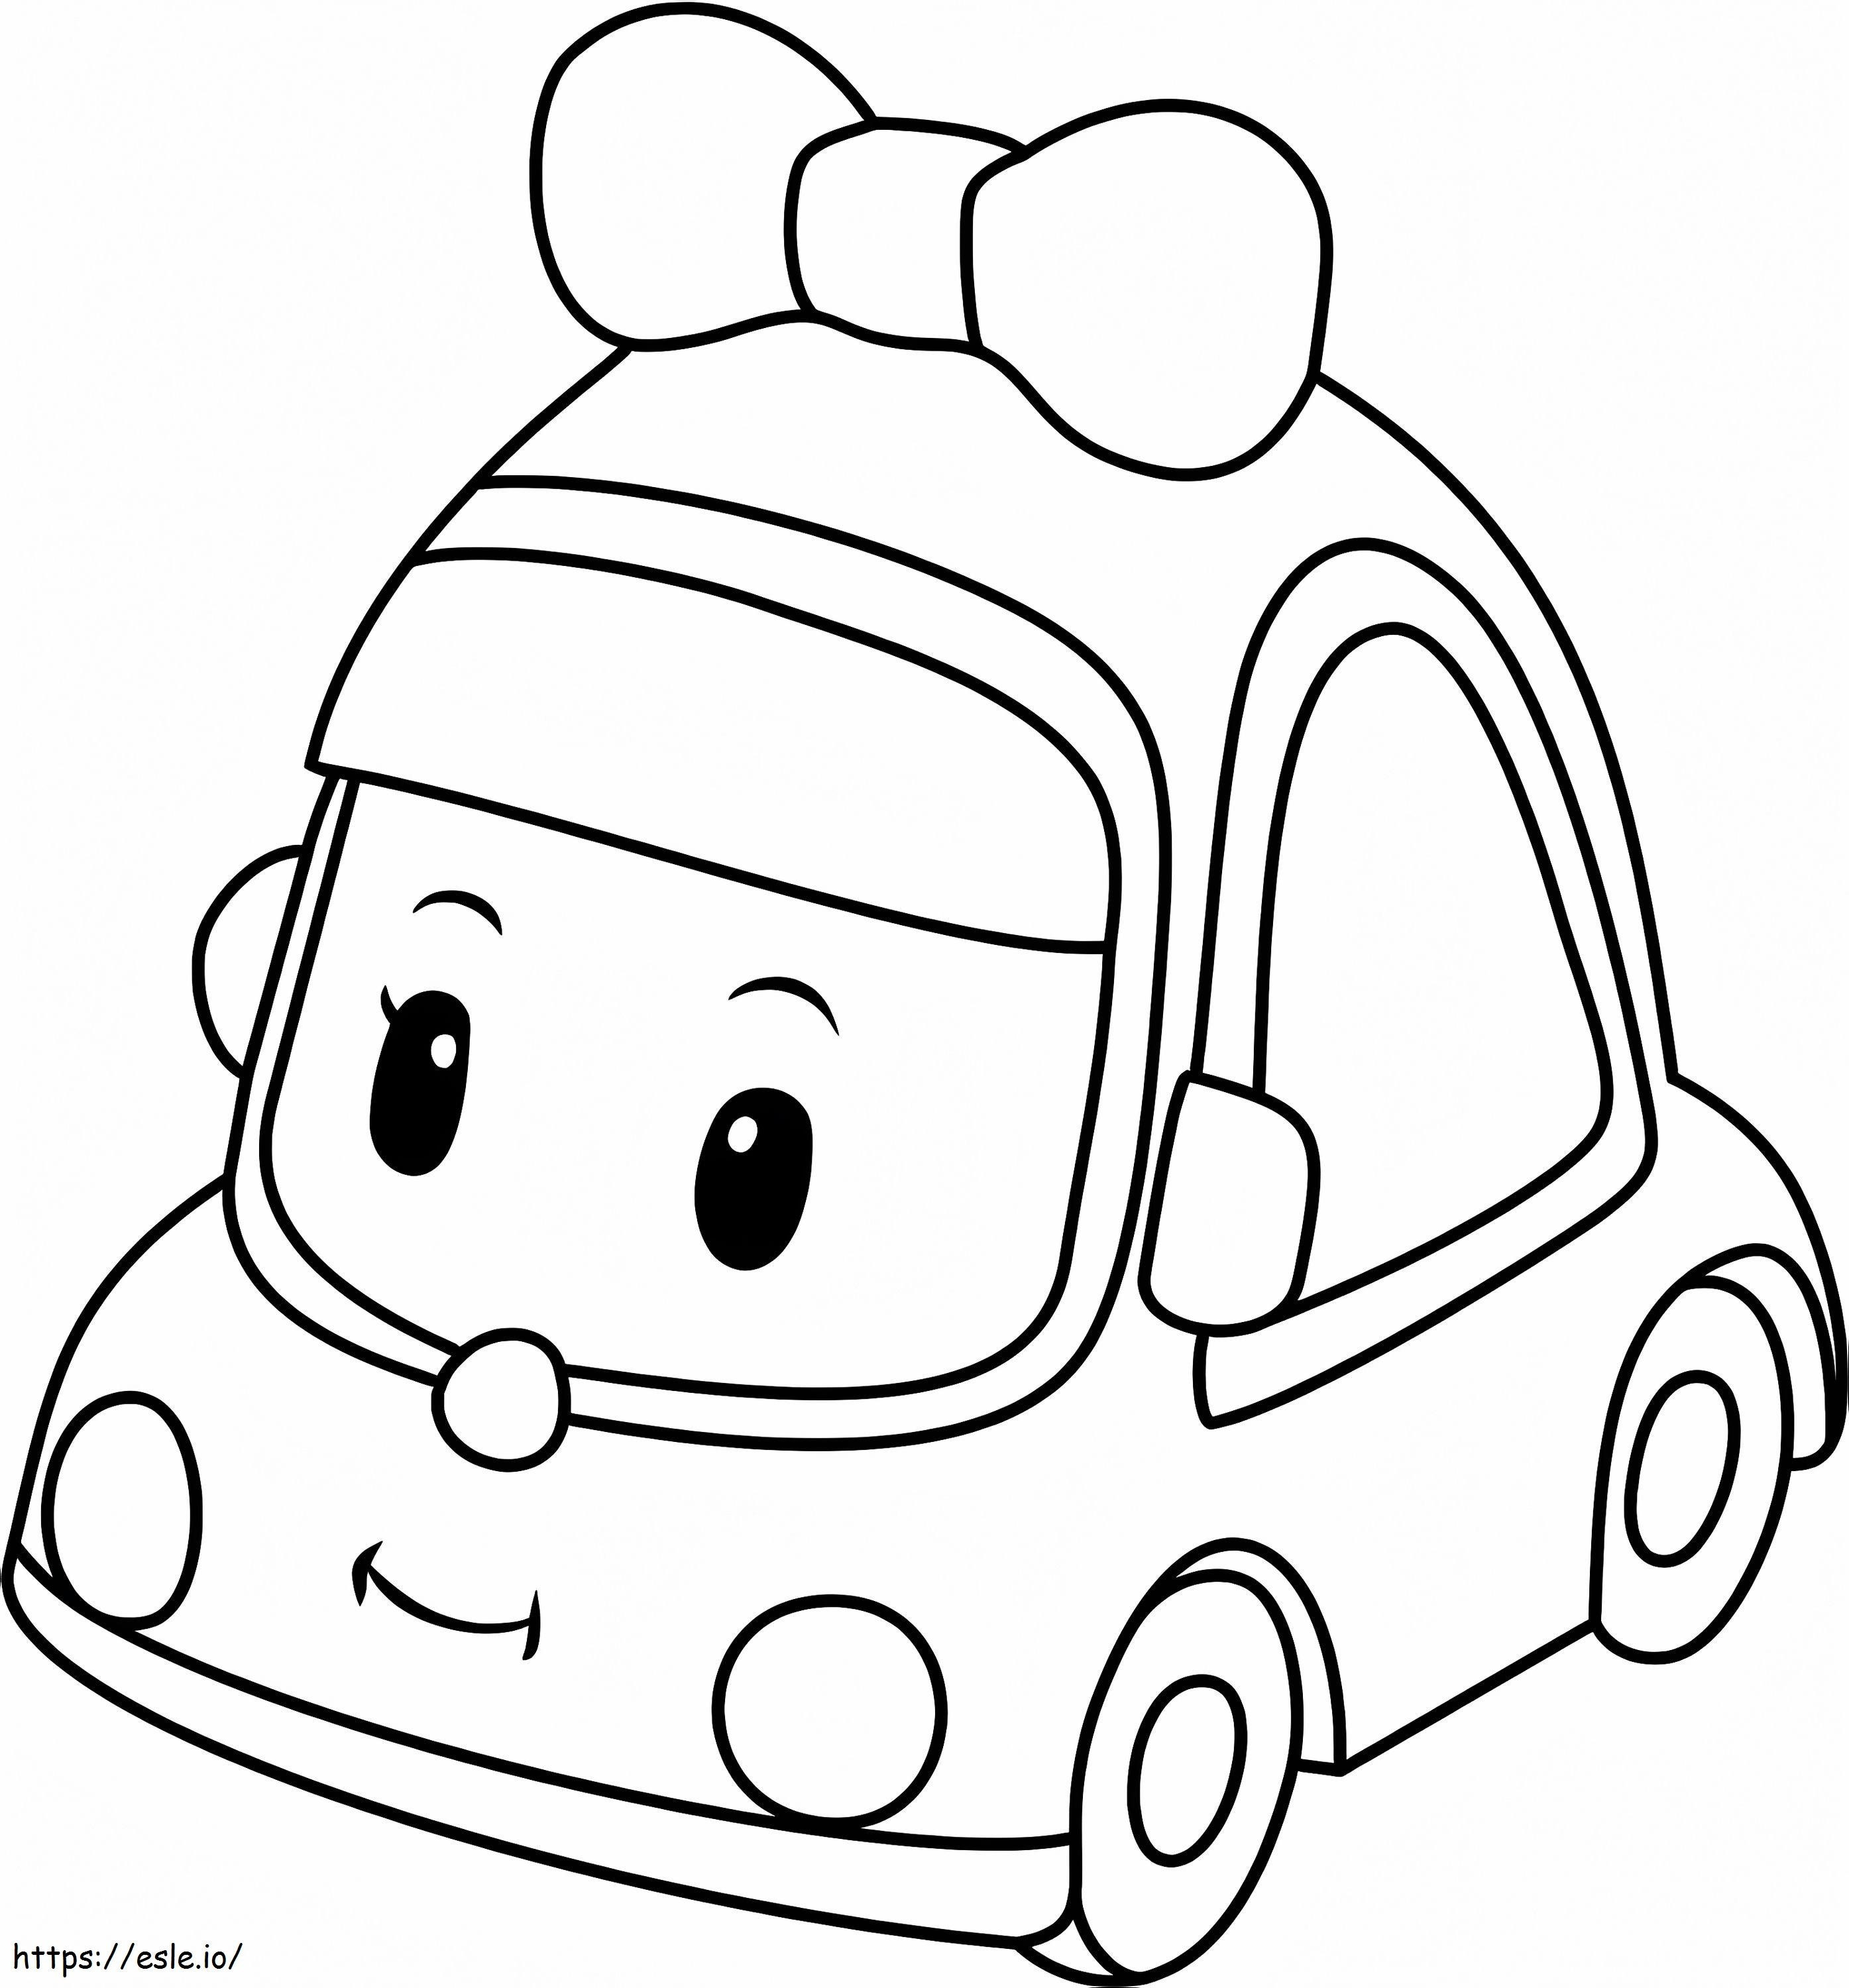 Mini Smiling coloring page